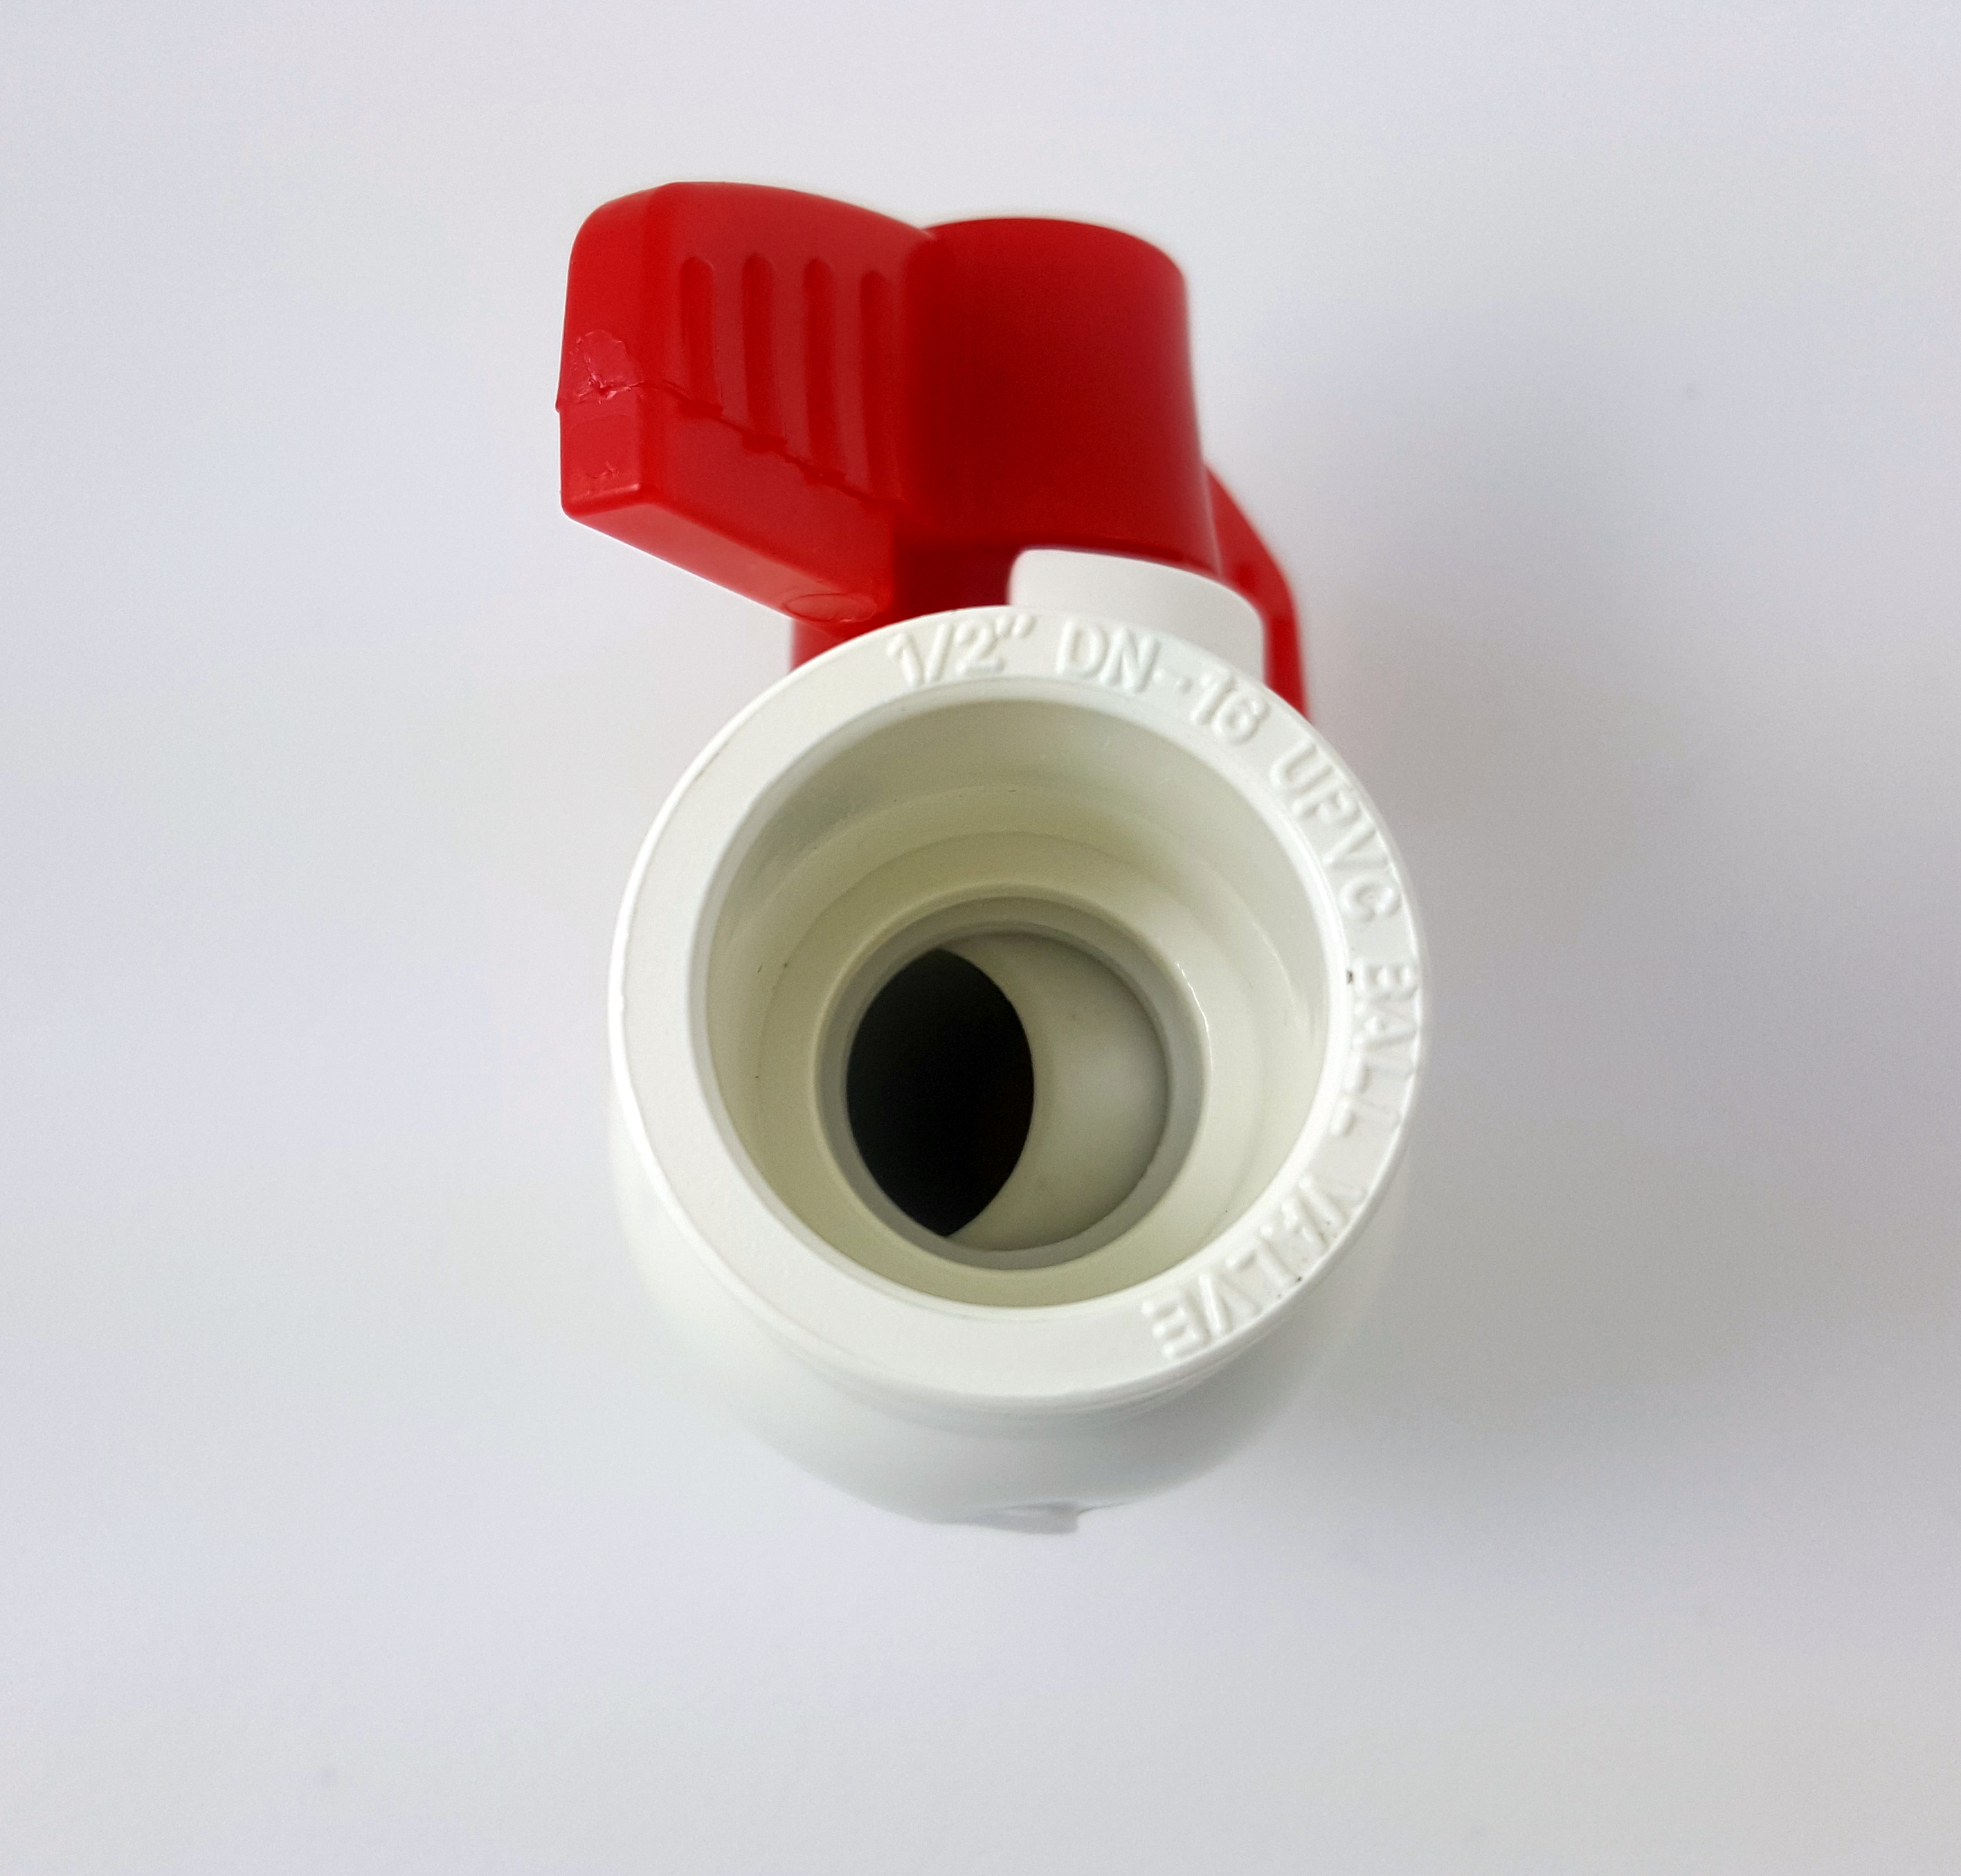 PVC COMPACT BALL VALVE 1/2" - Socket - Sanipro - (Pack of 20) - image 2 of 3